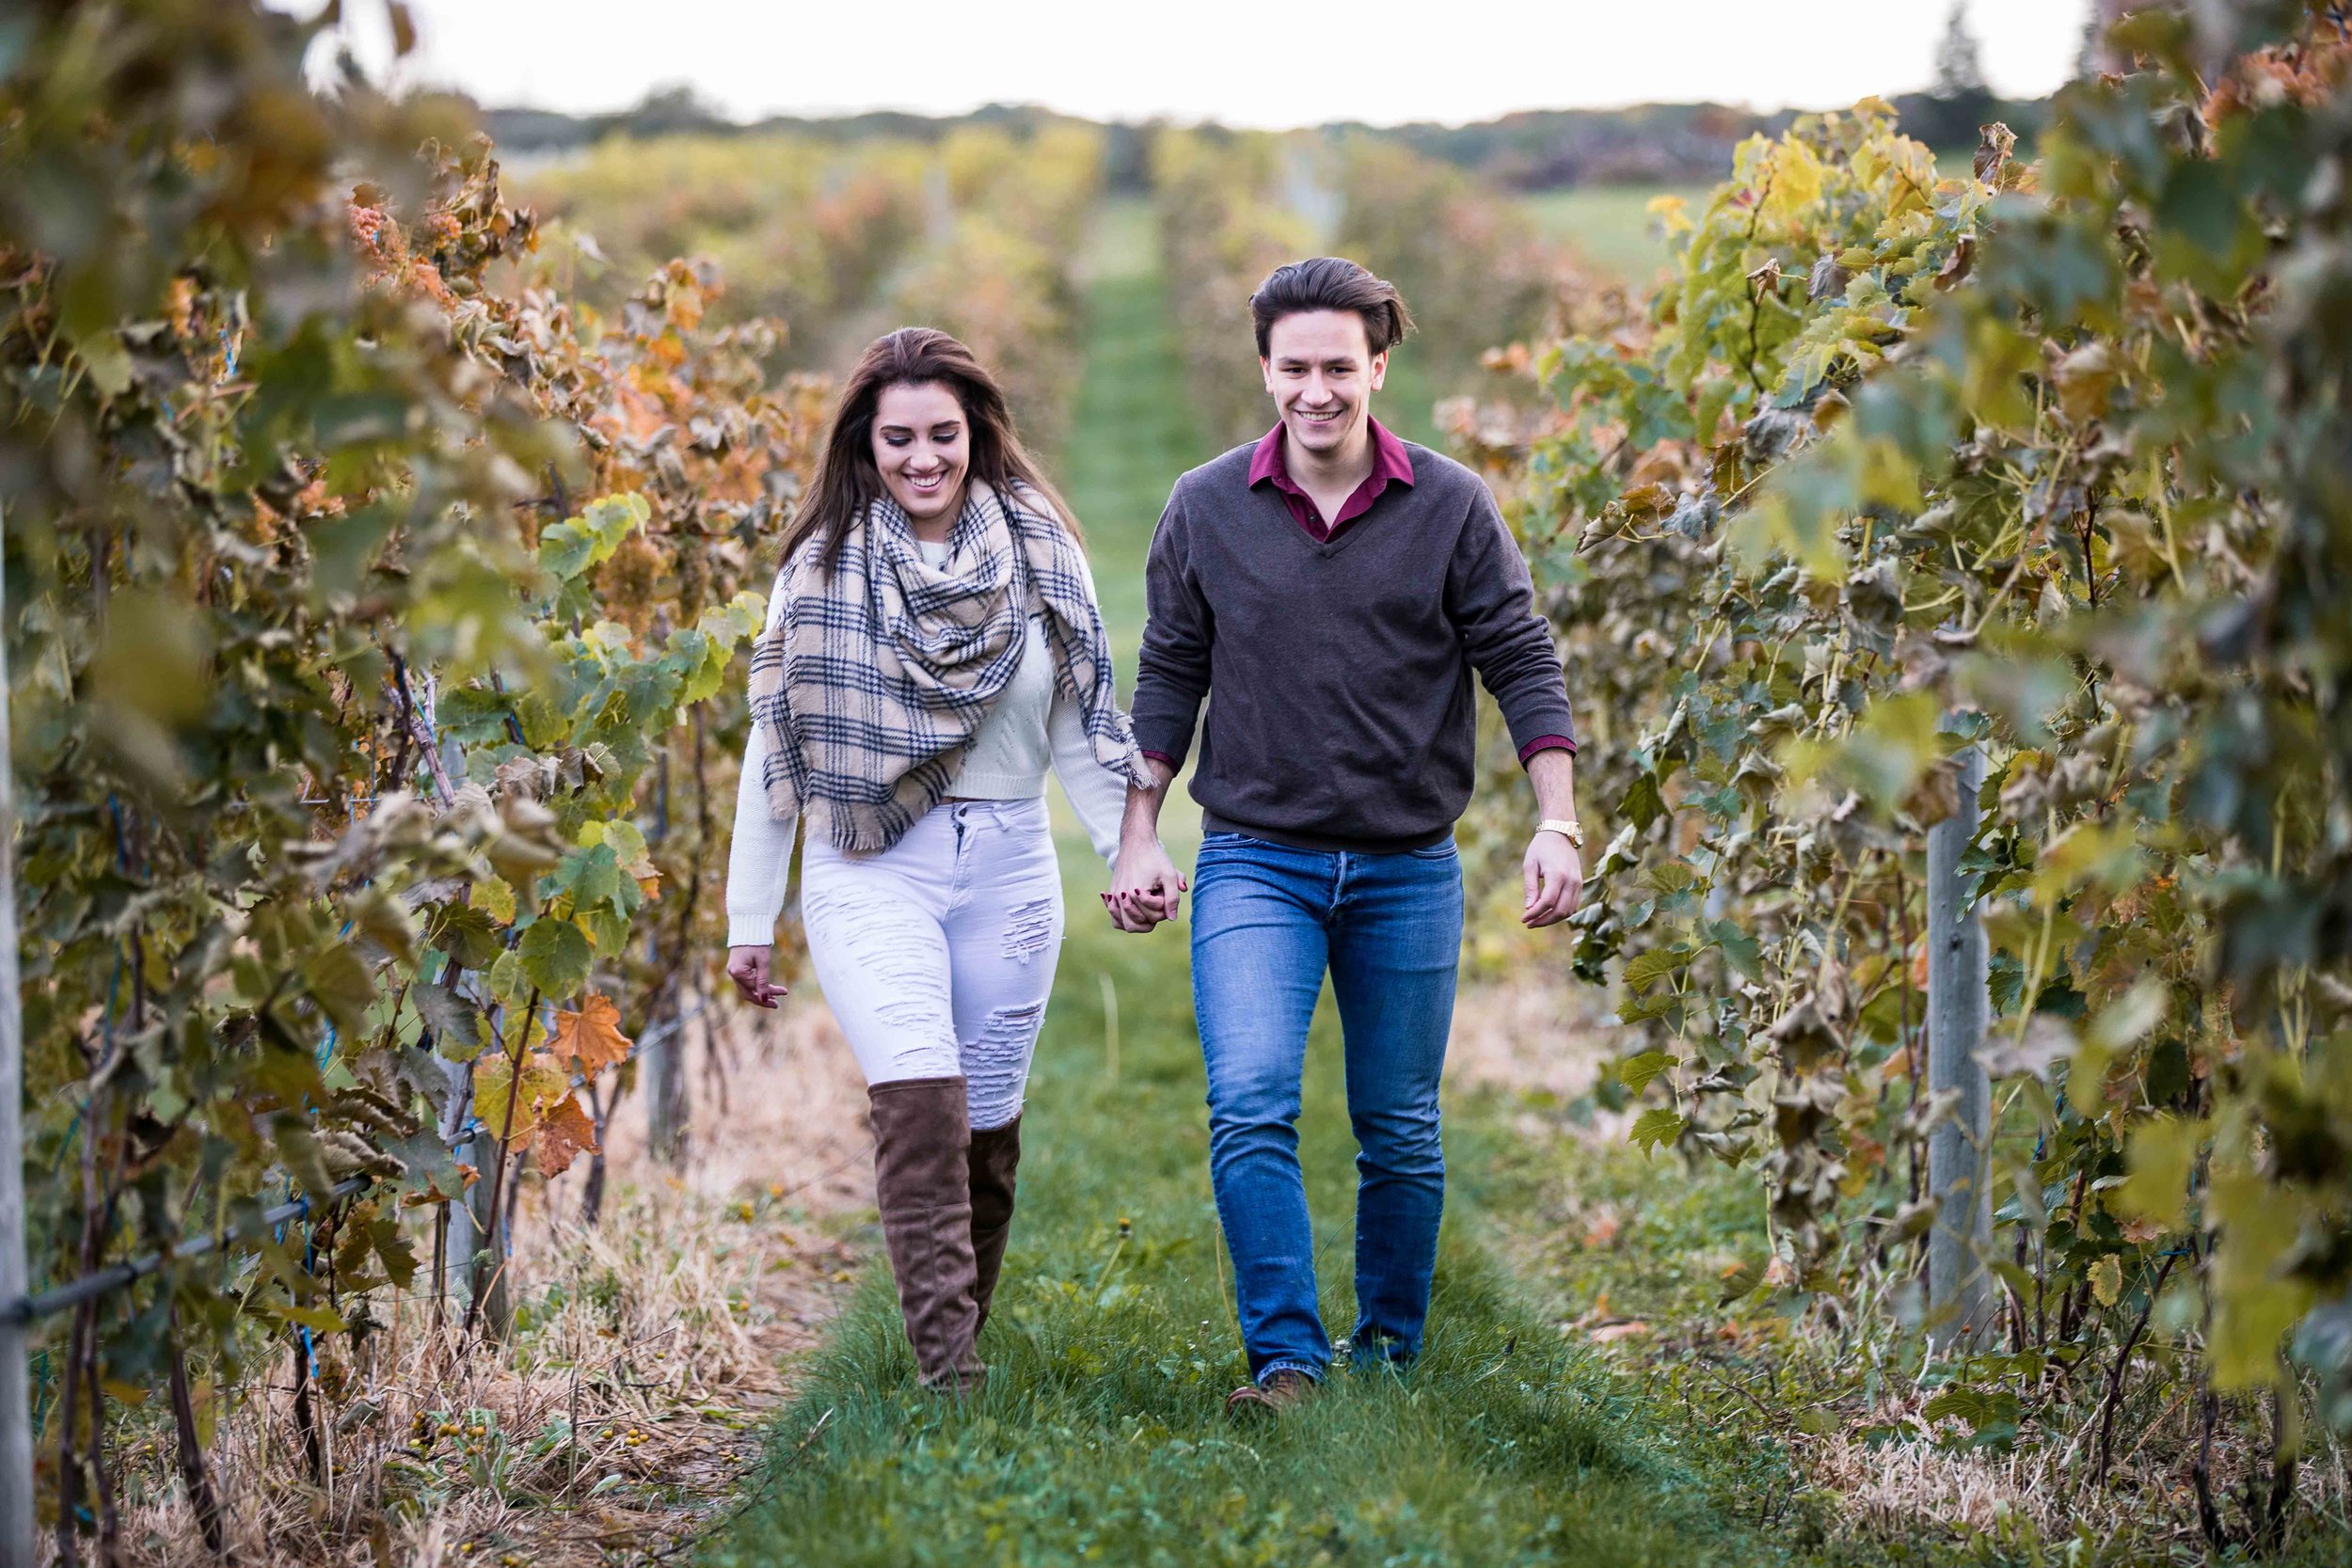  A couple walking through the vineyard holding hands 